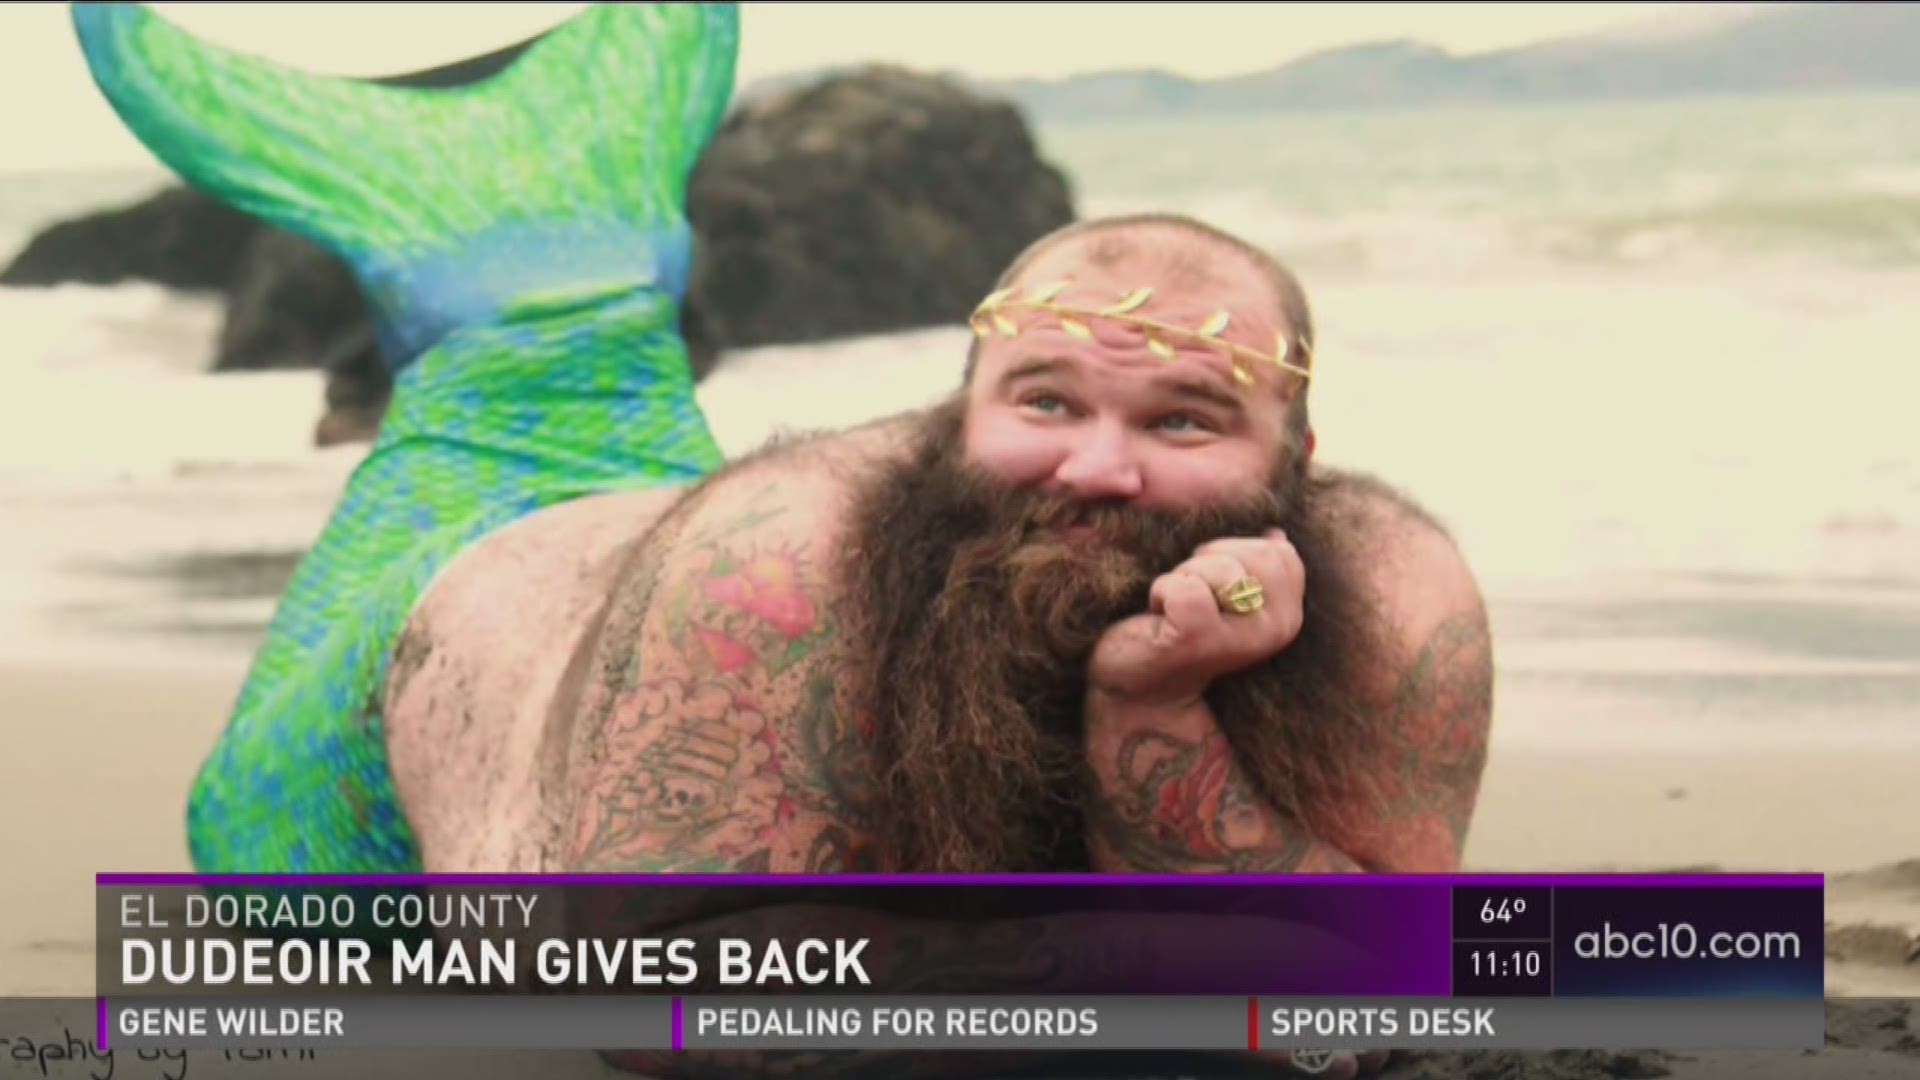 Dudeoir' man nearly bares all for worthy cause 